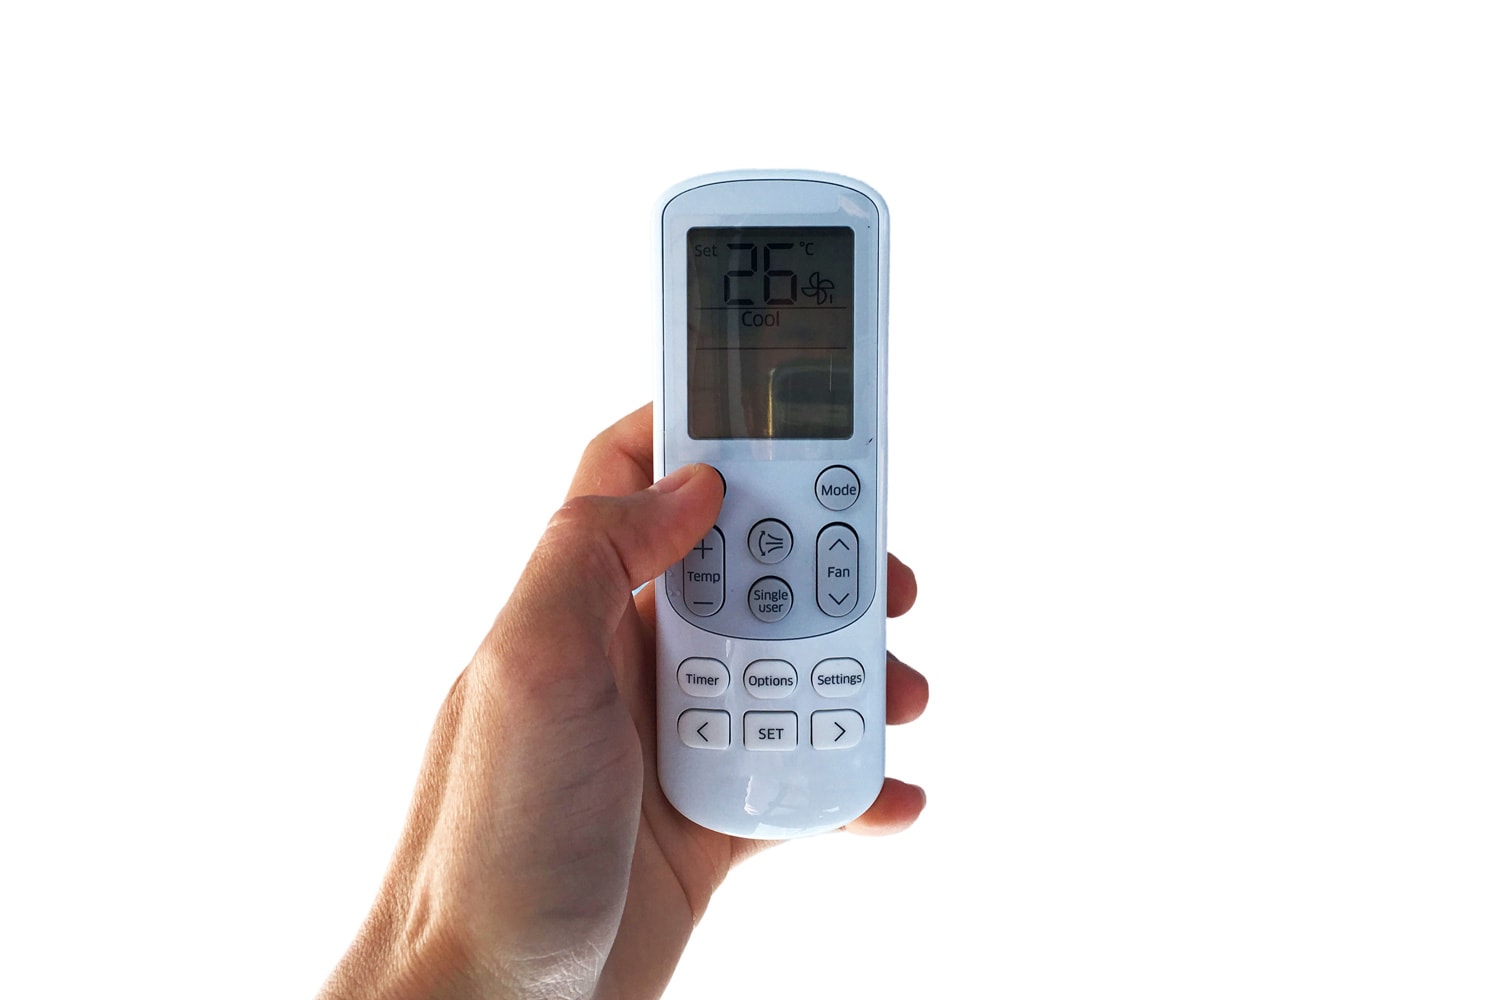 Using hand press remote control for air conditioning.